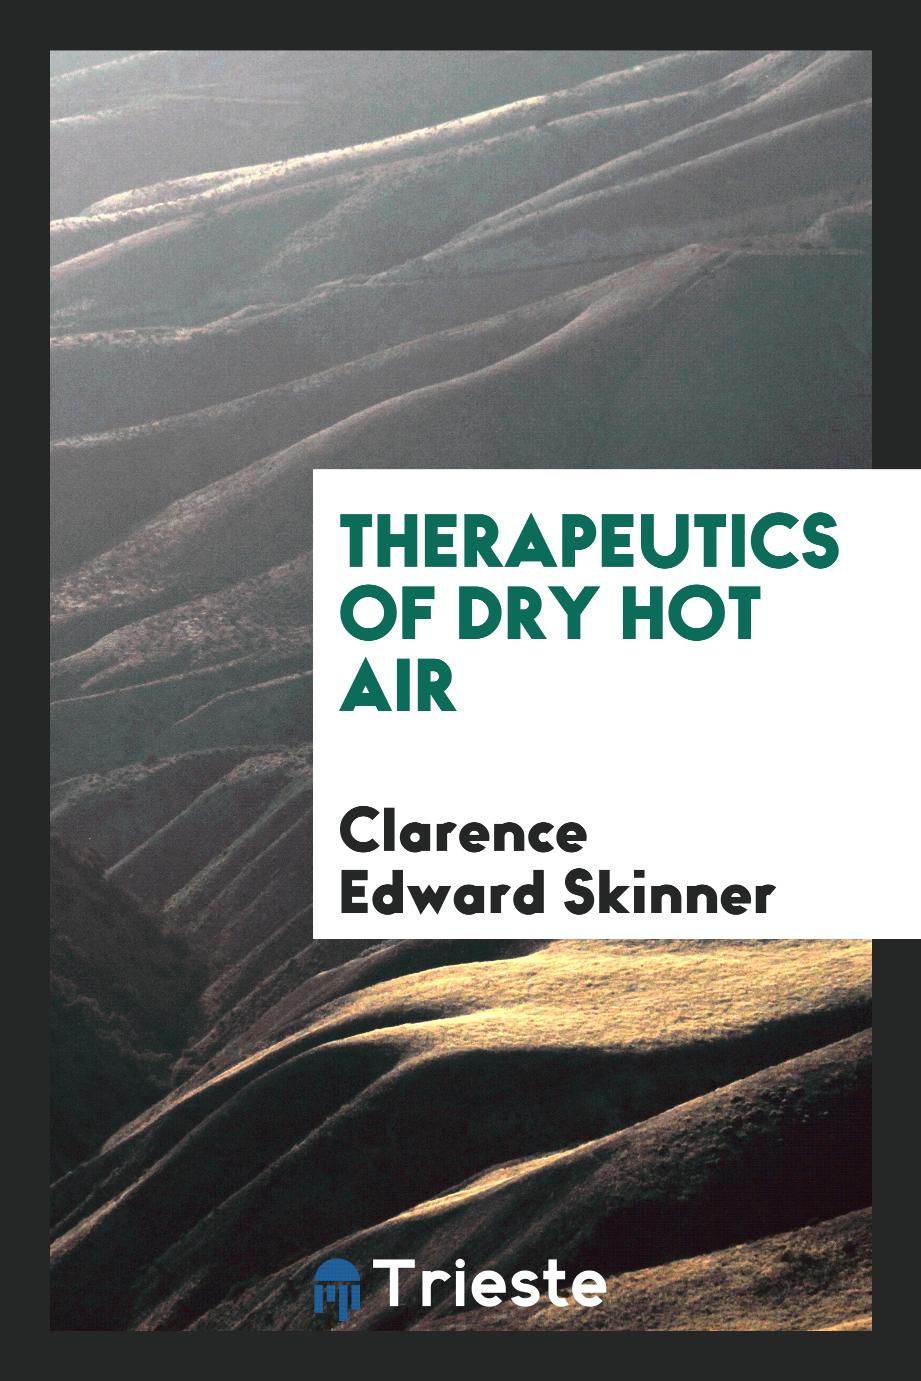 Therapeutics of dry hot air